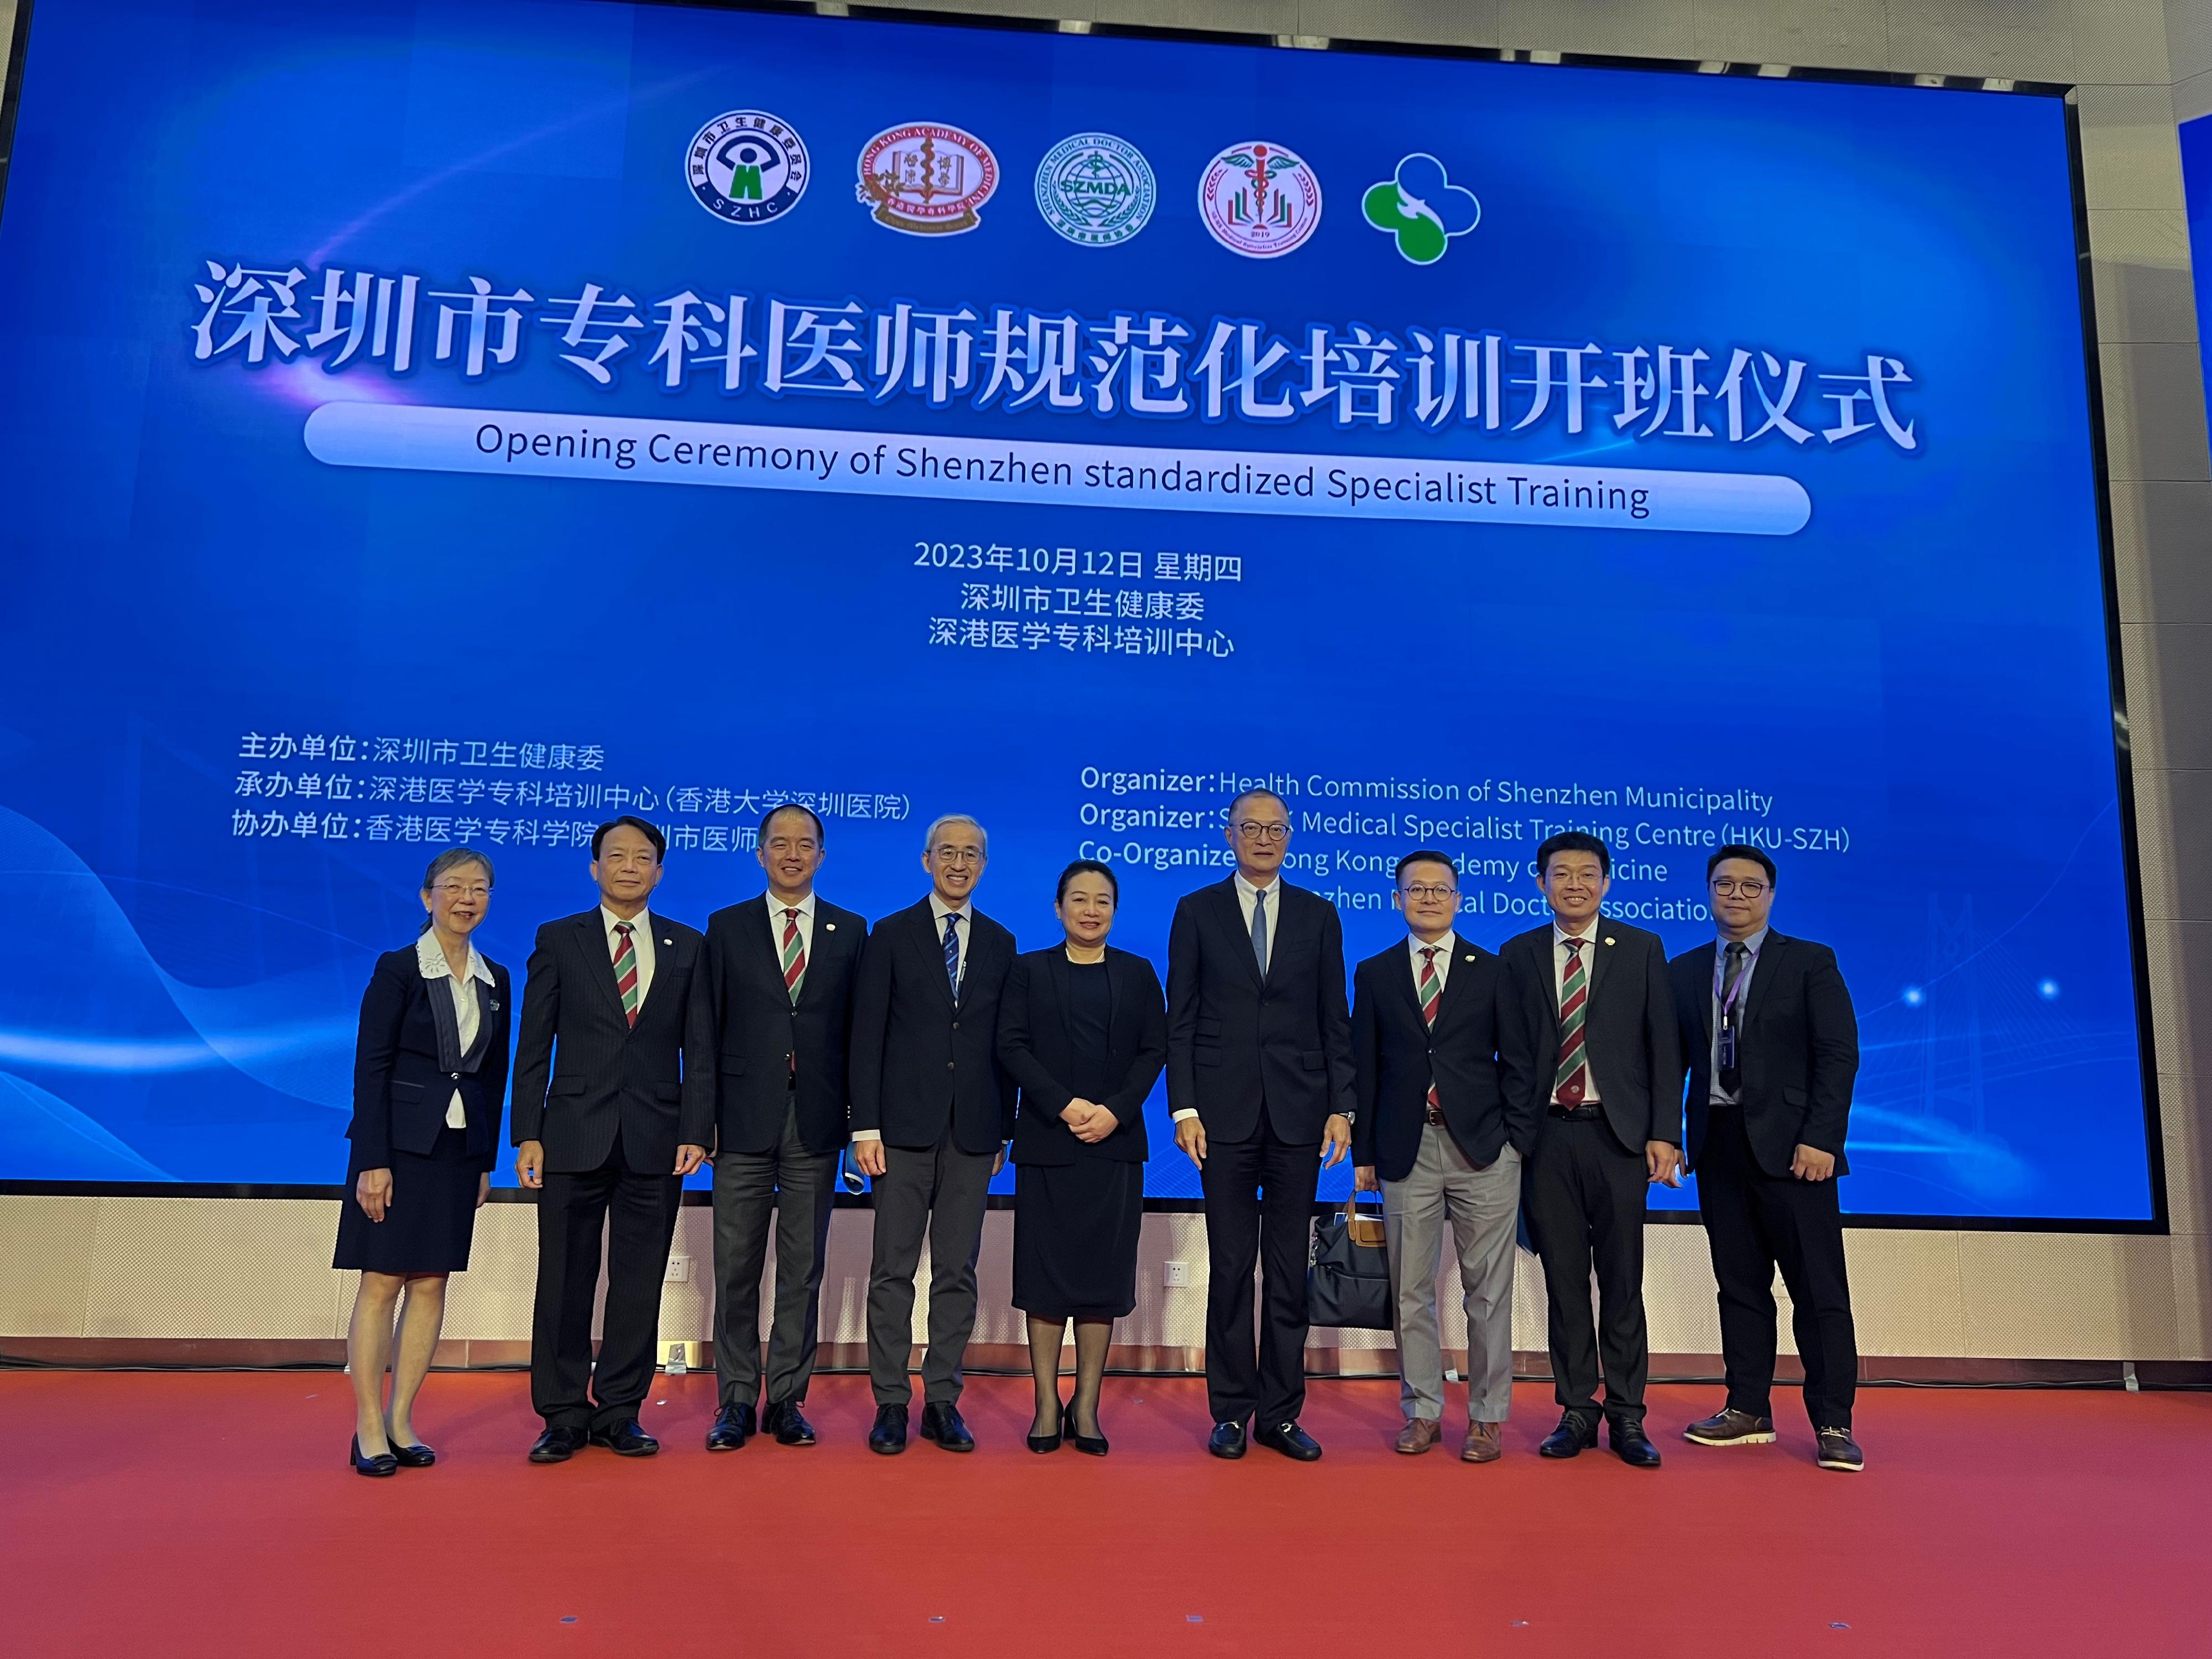 The Secretary for Health, Professor Lo Chung-mau, attended the opening ceremony of Shenzhen standardized specialist training of the Shenzhen-Hong Kong Medical Specialist Training Centre in Shenzhen today (October 12). Photo shows Professor Lo (fourth right);  the Director General of the Shenzhen Municipal Health Commission, Ms Wu Hongyan (centre); the President of the Hong Kong Academy of Medicine (HKAM), Professor Gilberto Leung (third left); the Hospital Chief Executive of the University of Hong Kong - Shenzhen Hospital, Professor Kenneth Cheung (fourth left), and other representatives of the HKAM.